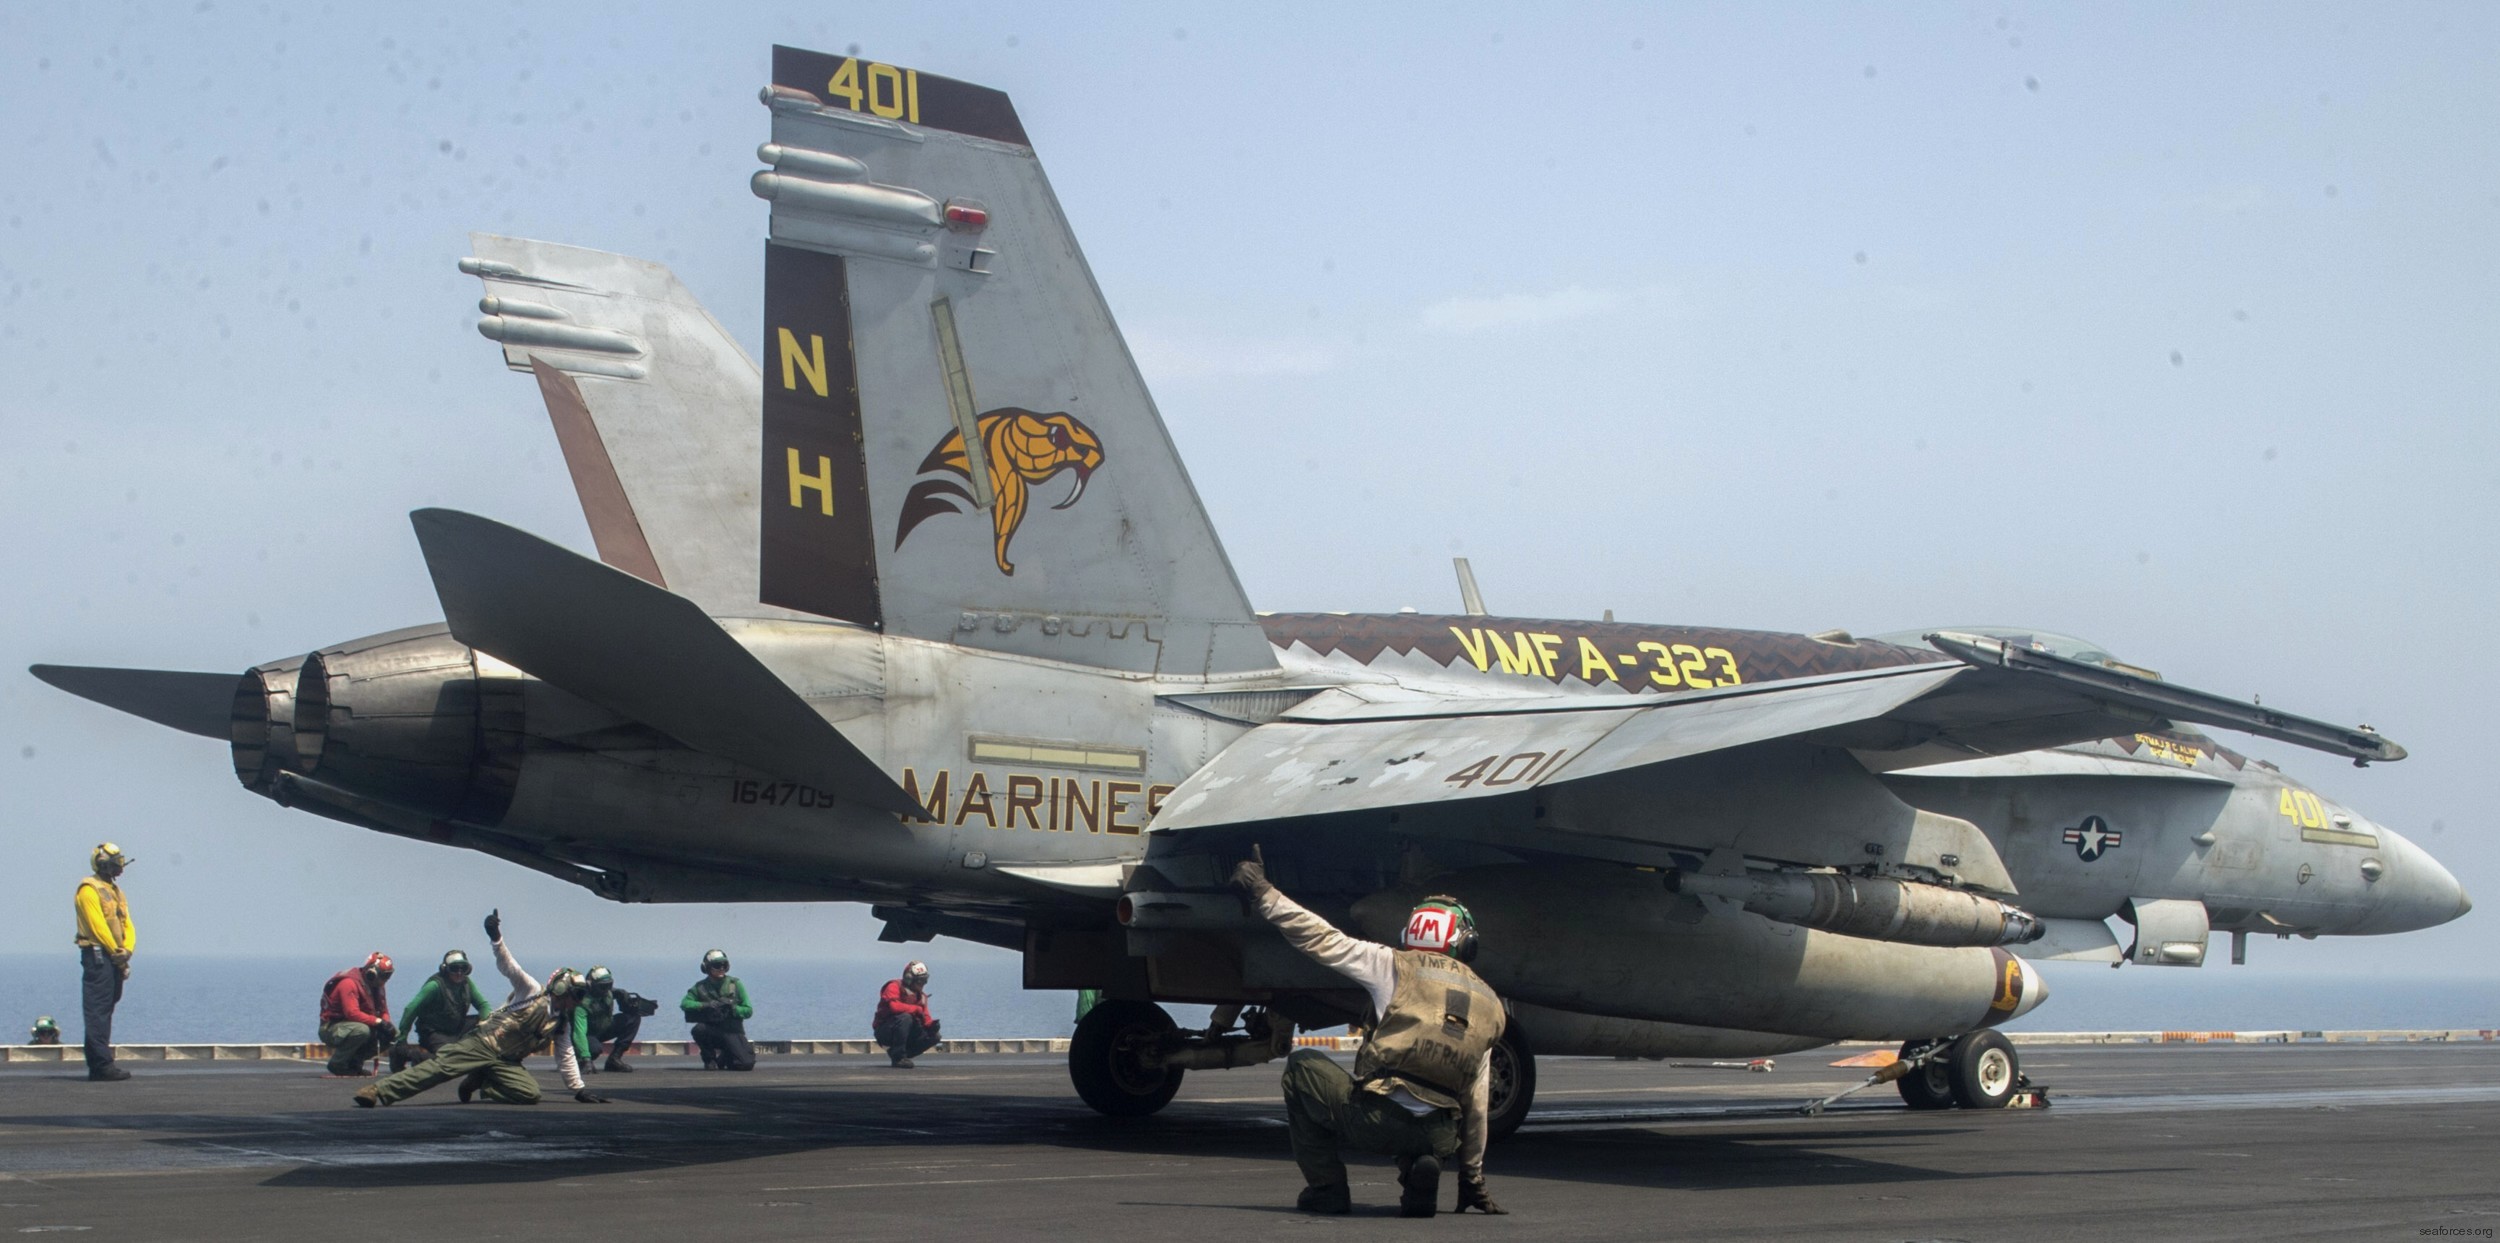 vmfa-323 death rattlers marine fighter attack squadron f/a-18c hornet cvw-11 uss nimitz cvn-68 20 special painting